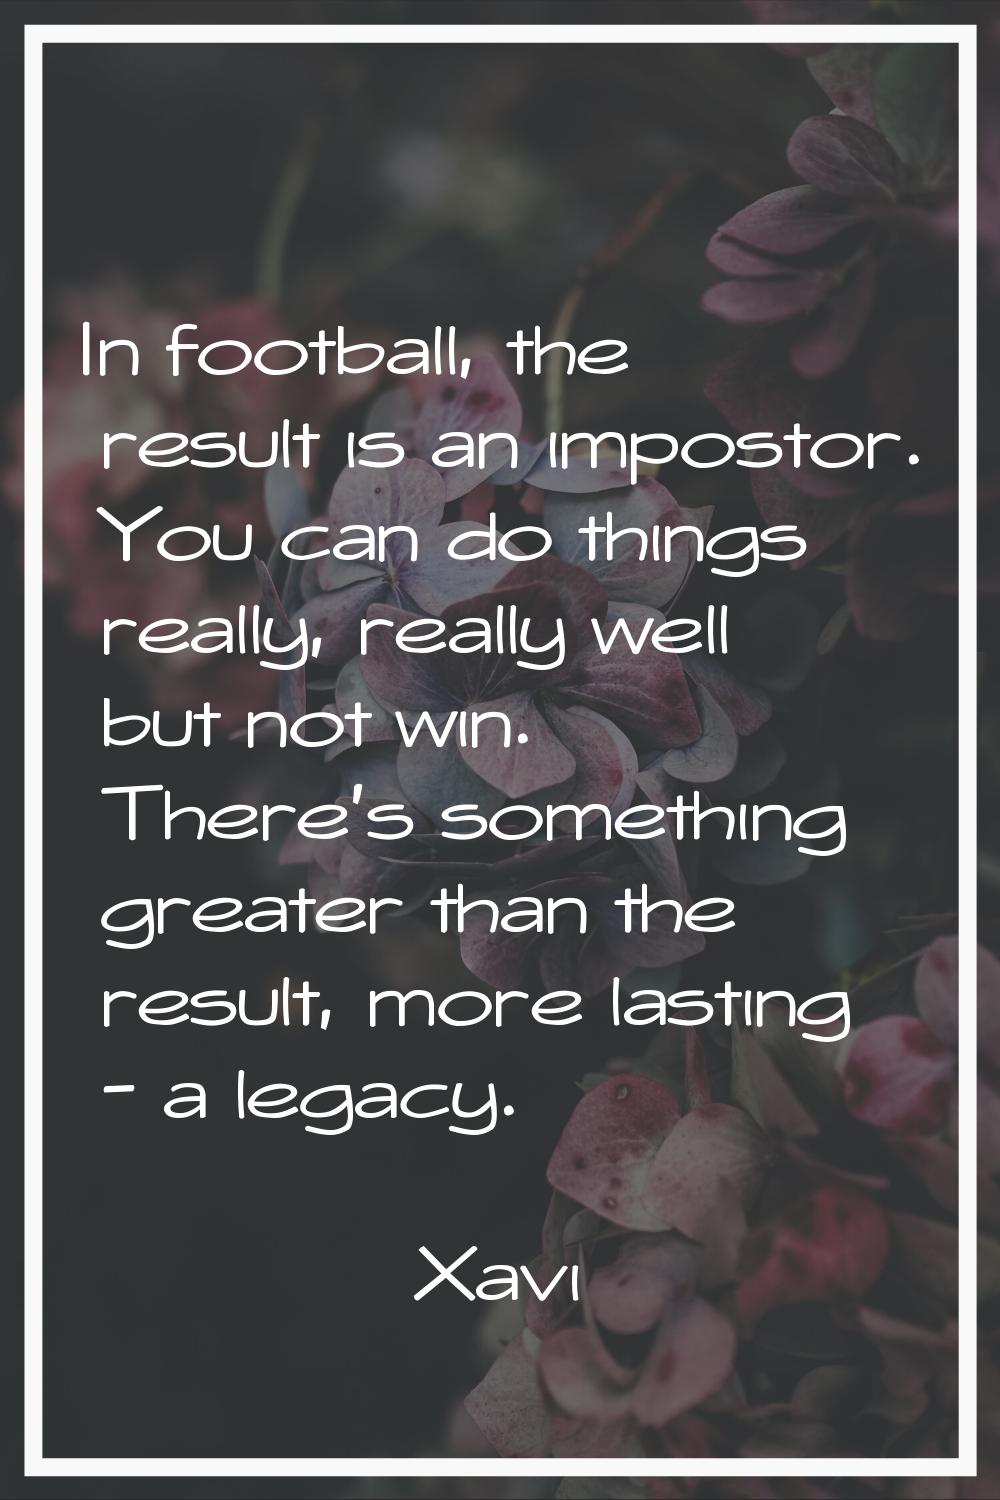 In football, the result is an impostor. You can do things really, really well but not win. There's 